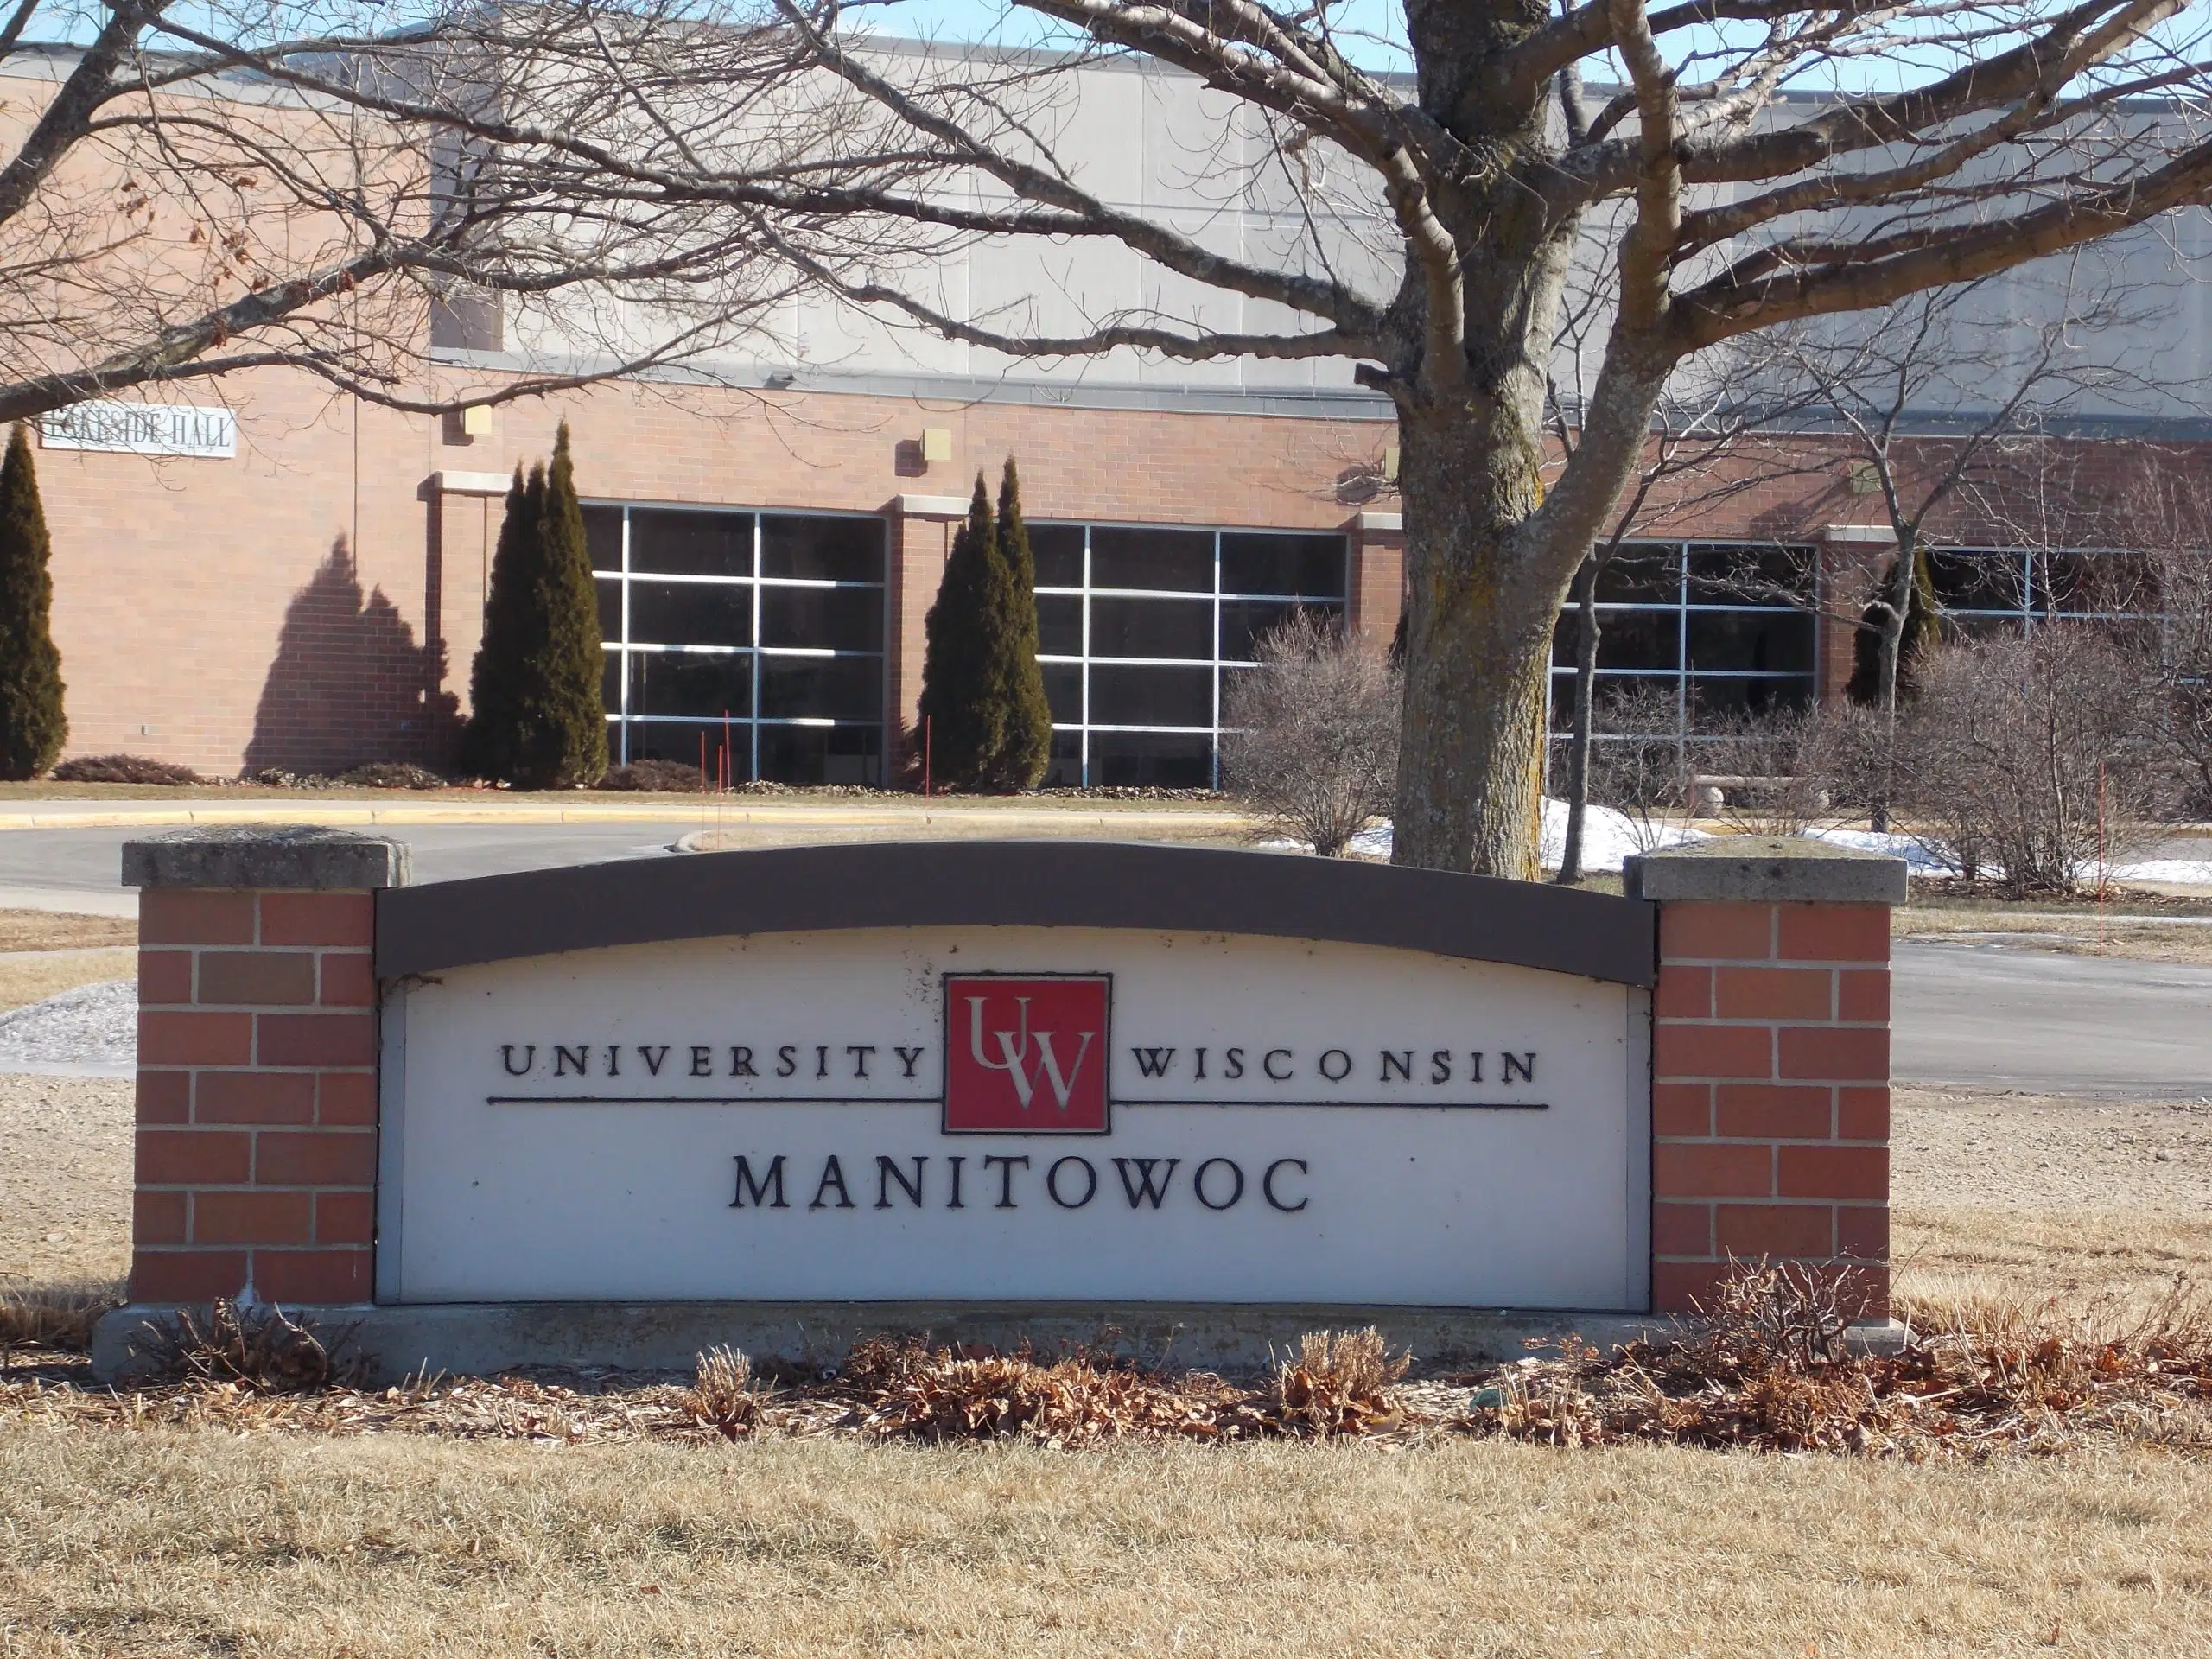 UWGB Manitowoc Campus to Host Business Idea Workshop and Student Business Idea Contest